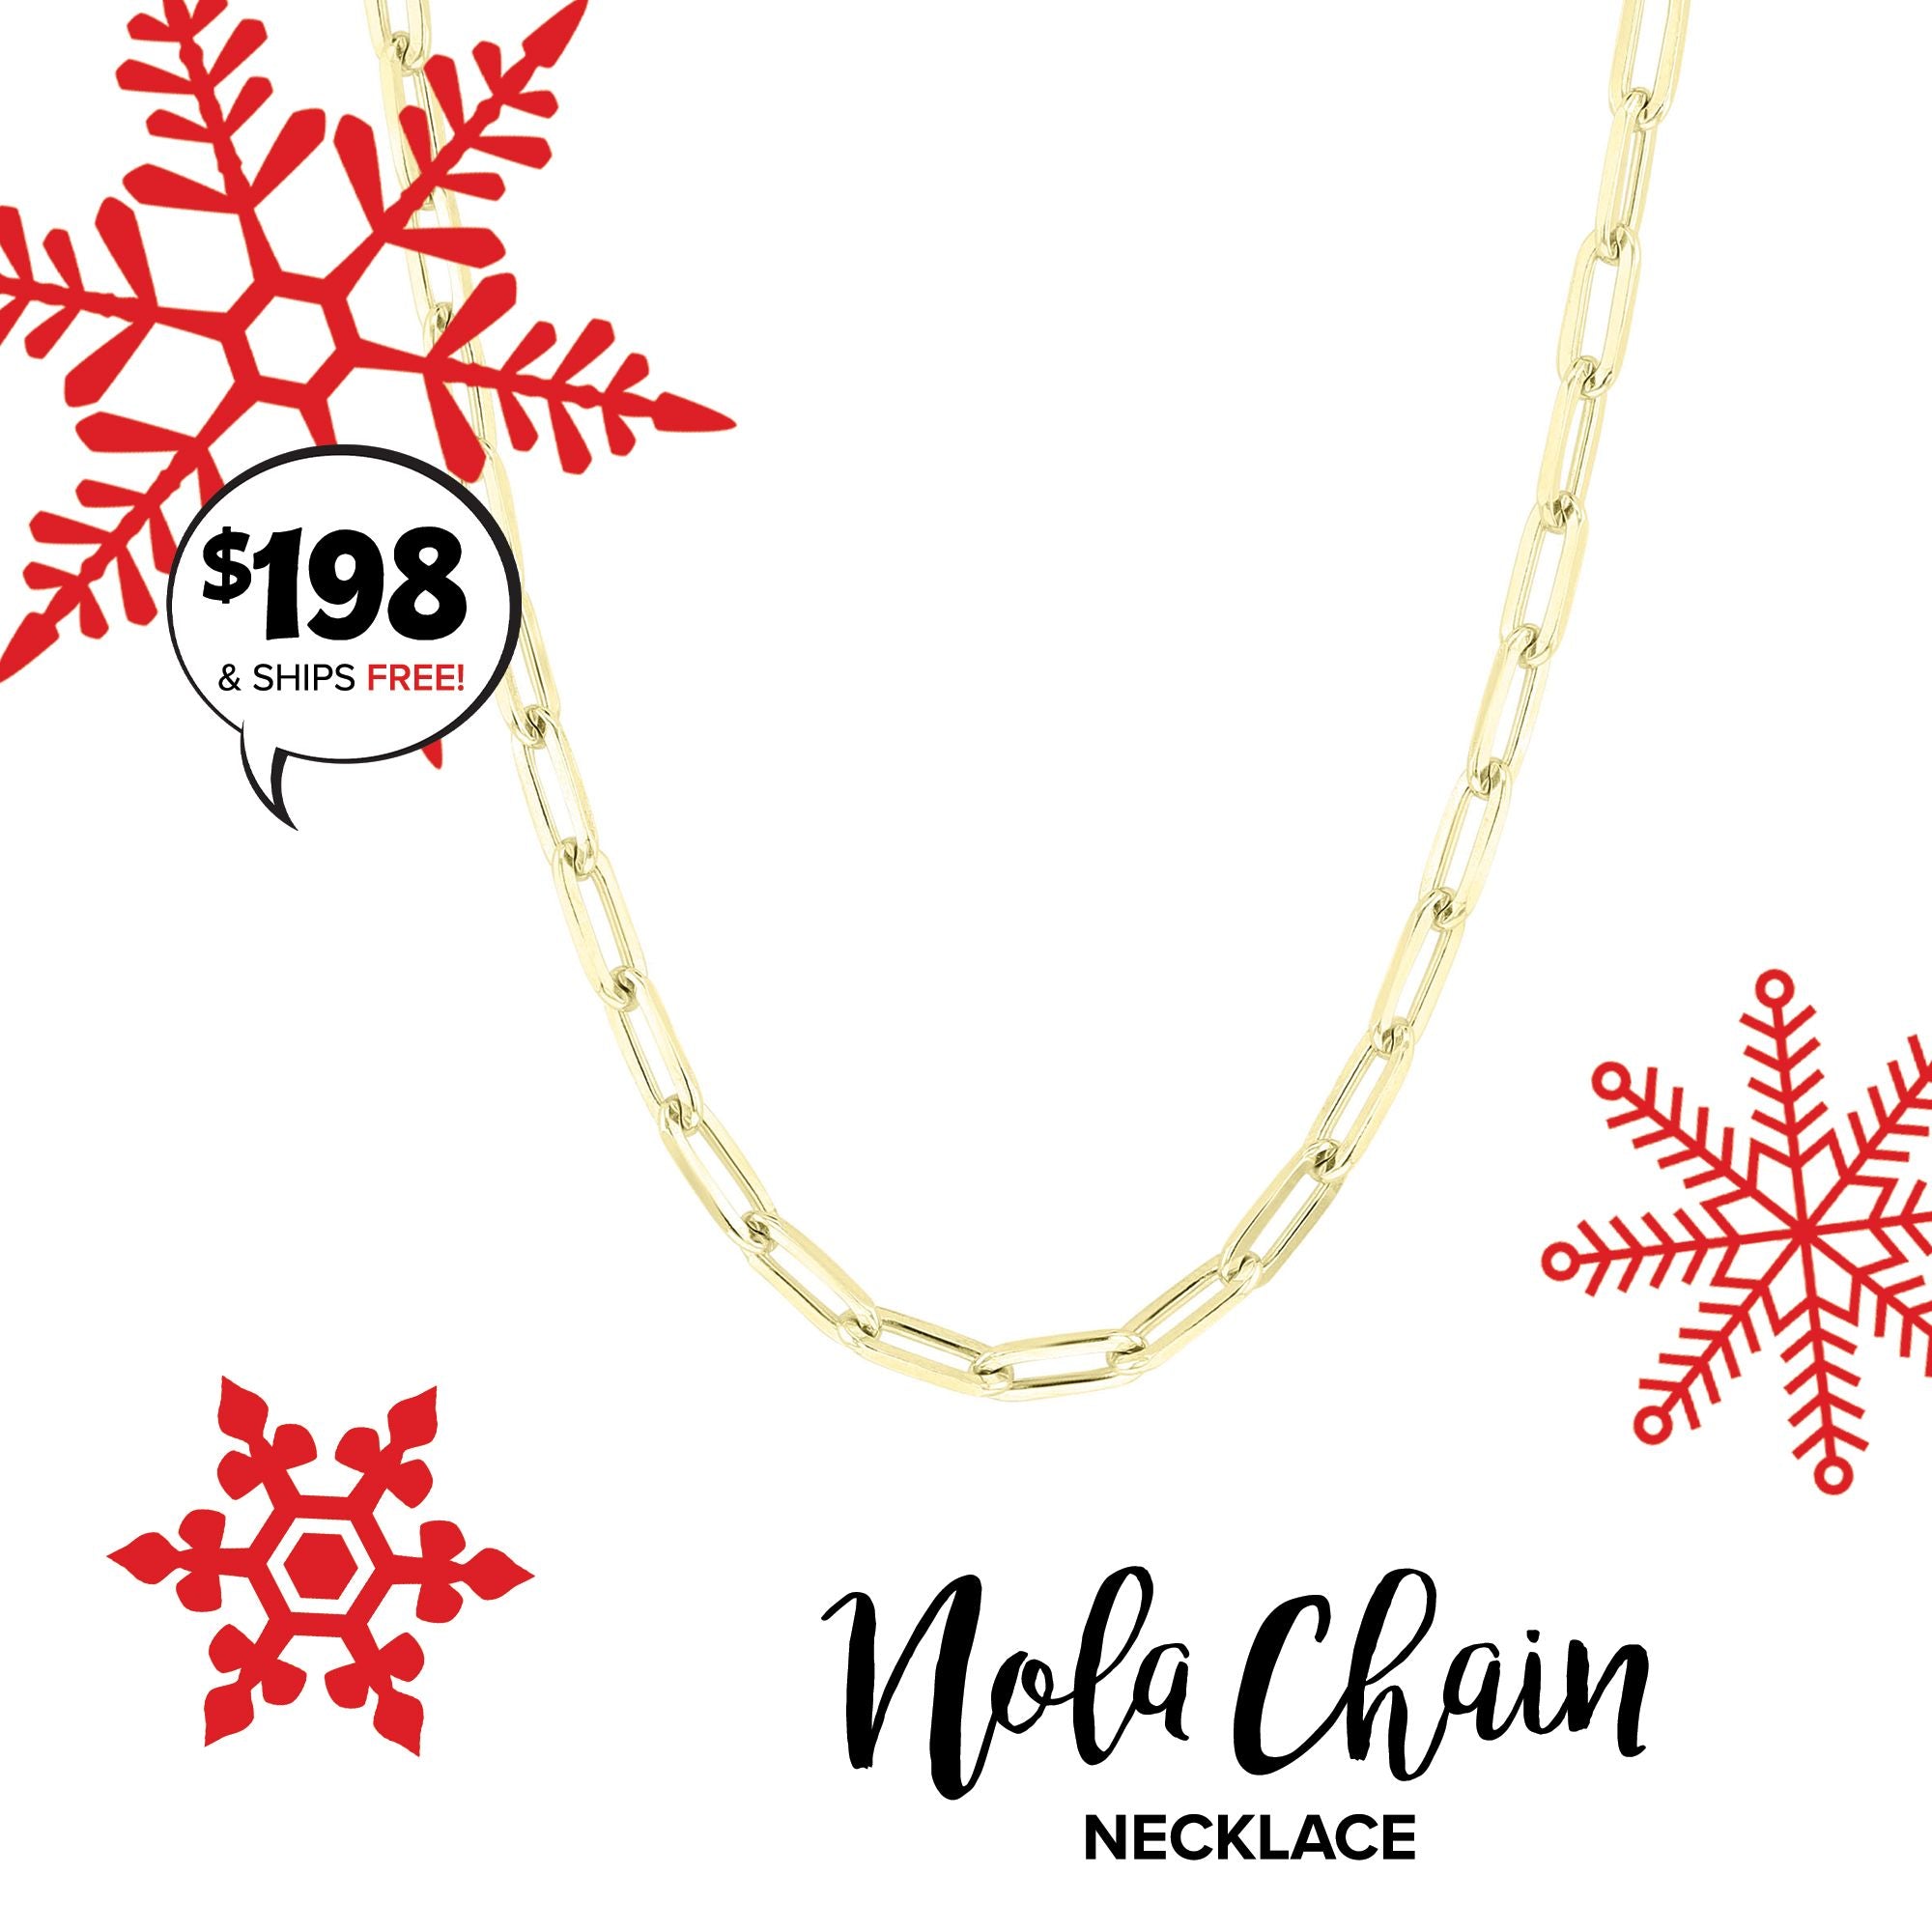 Nola Chain Necklace from Steven Singer Jewelers